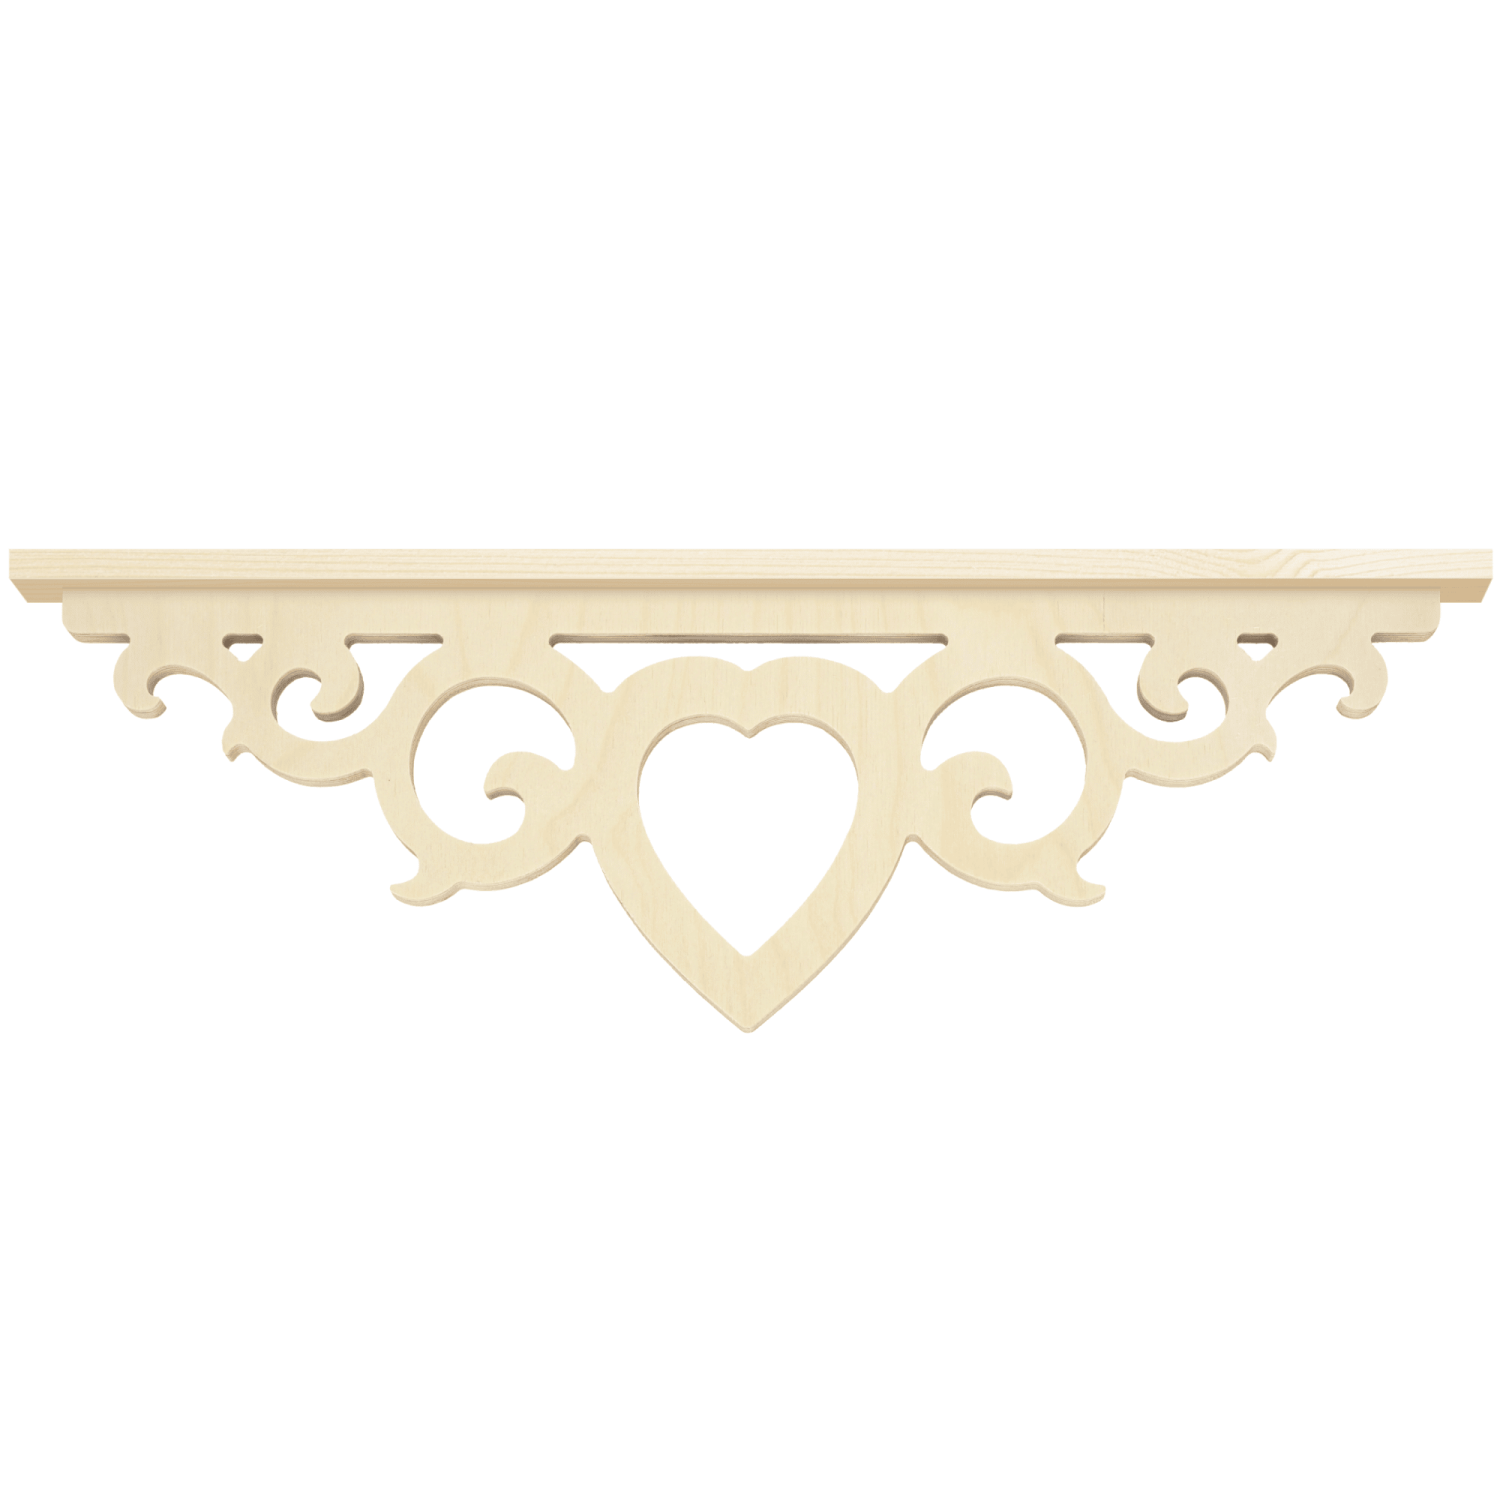 Middle bracket 002A - Classic wooden corbel & bracket buddy with decotaive wooden strip